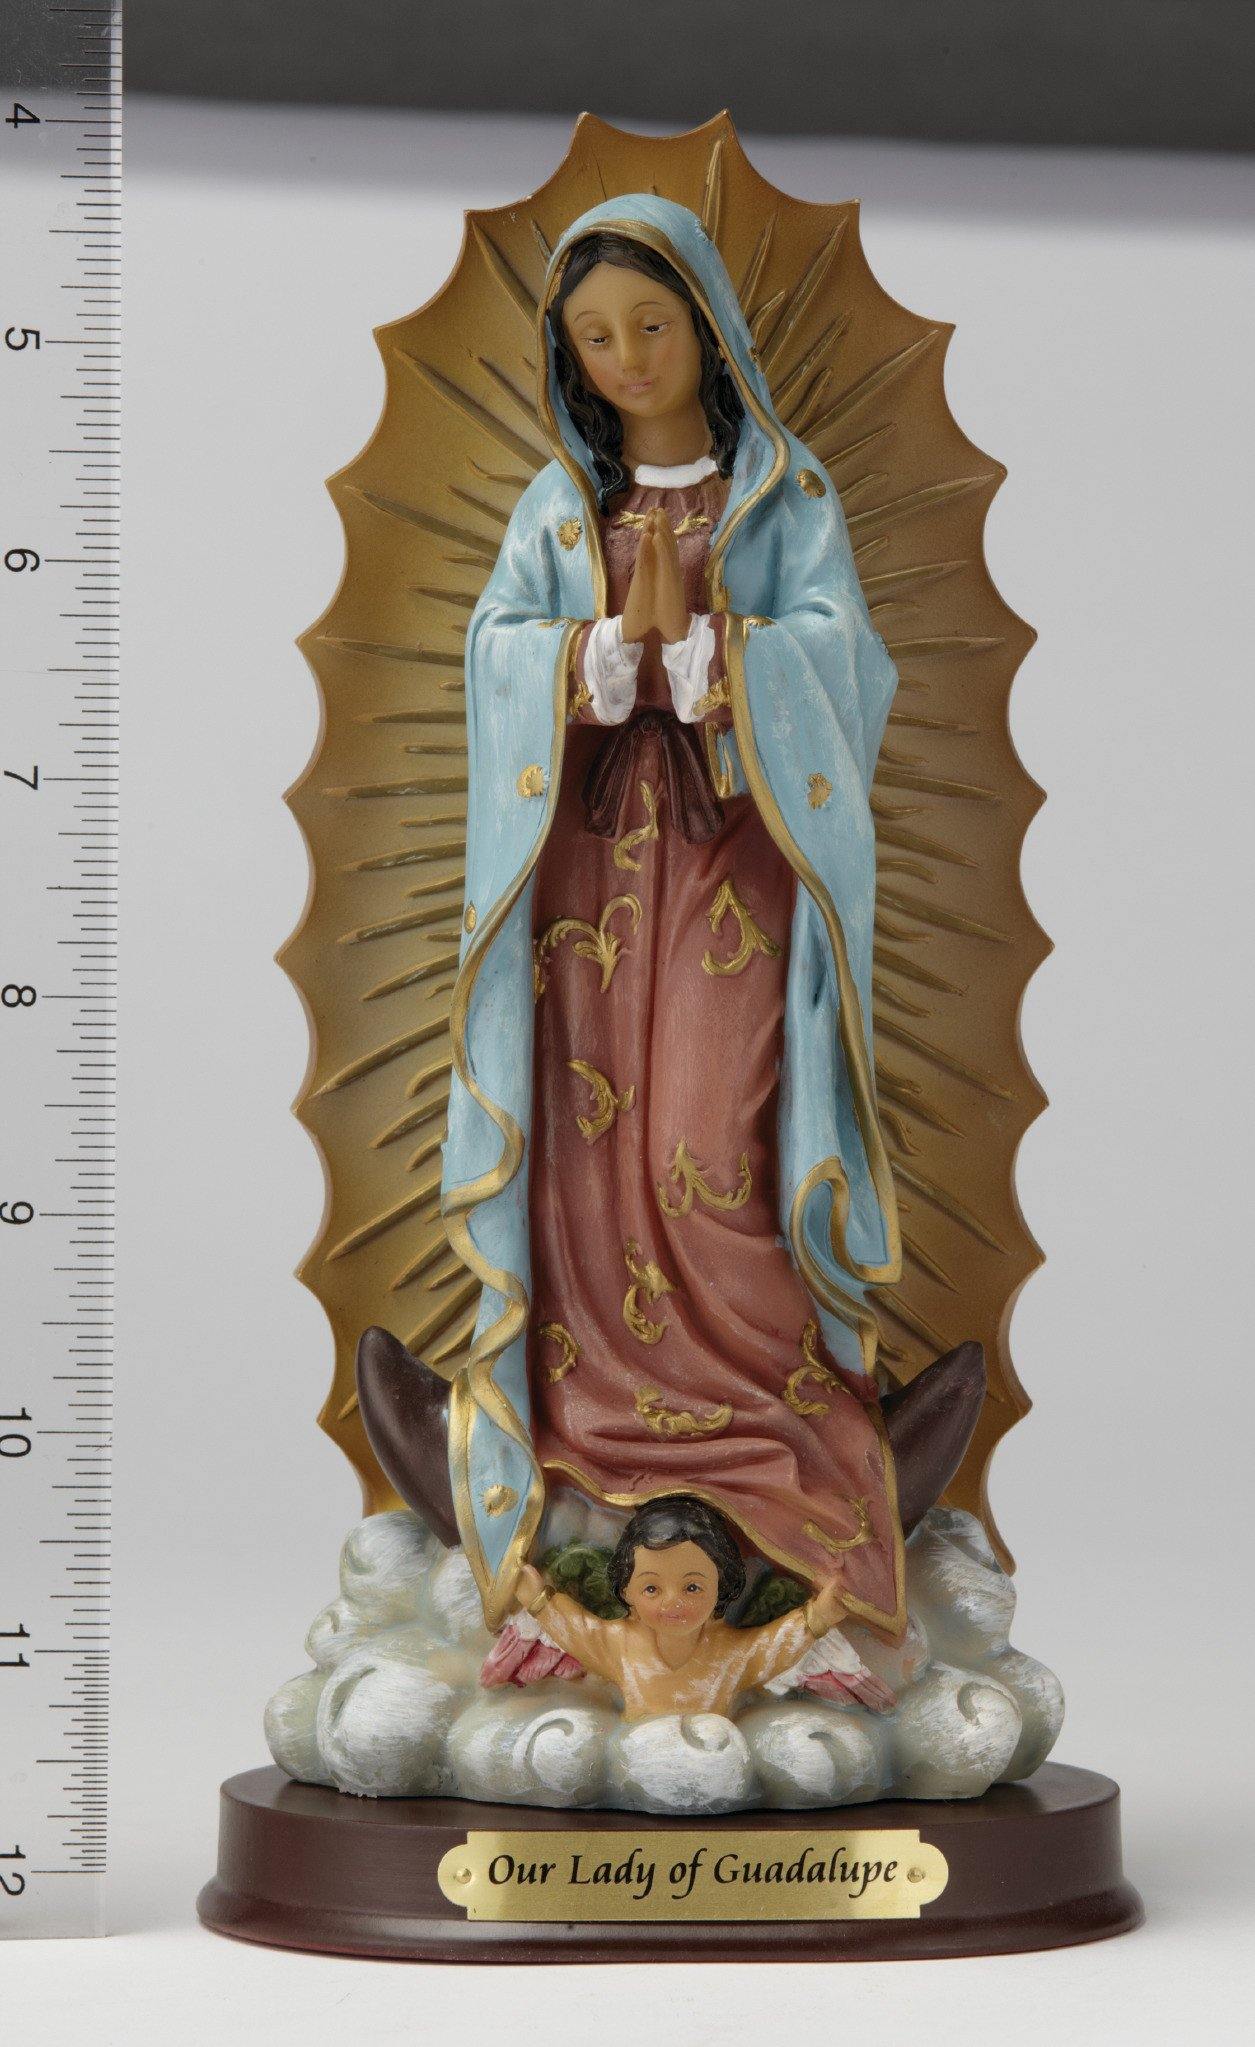 8" Our Lady of Guadalupe Statue - Hand Painted - Religious Art - Chiarelli's Religious Goods & Church Supply